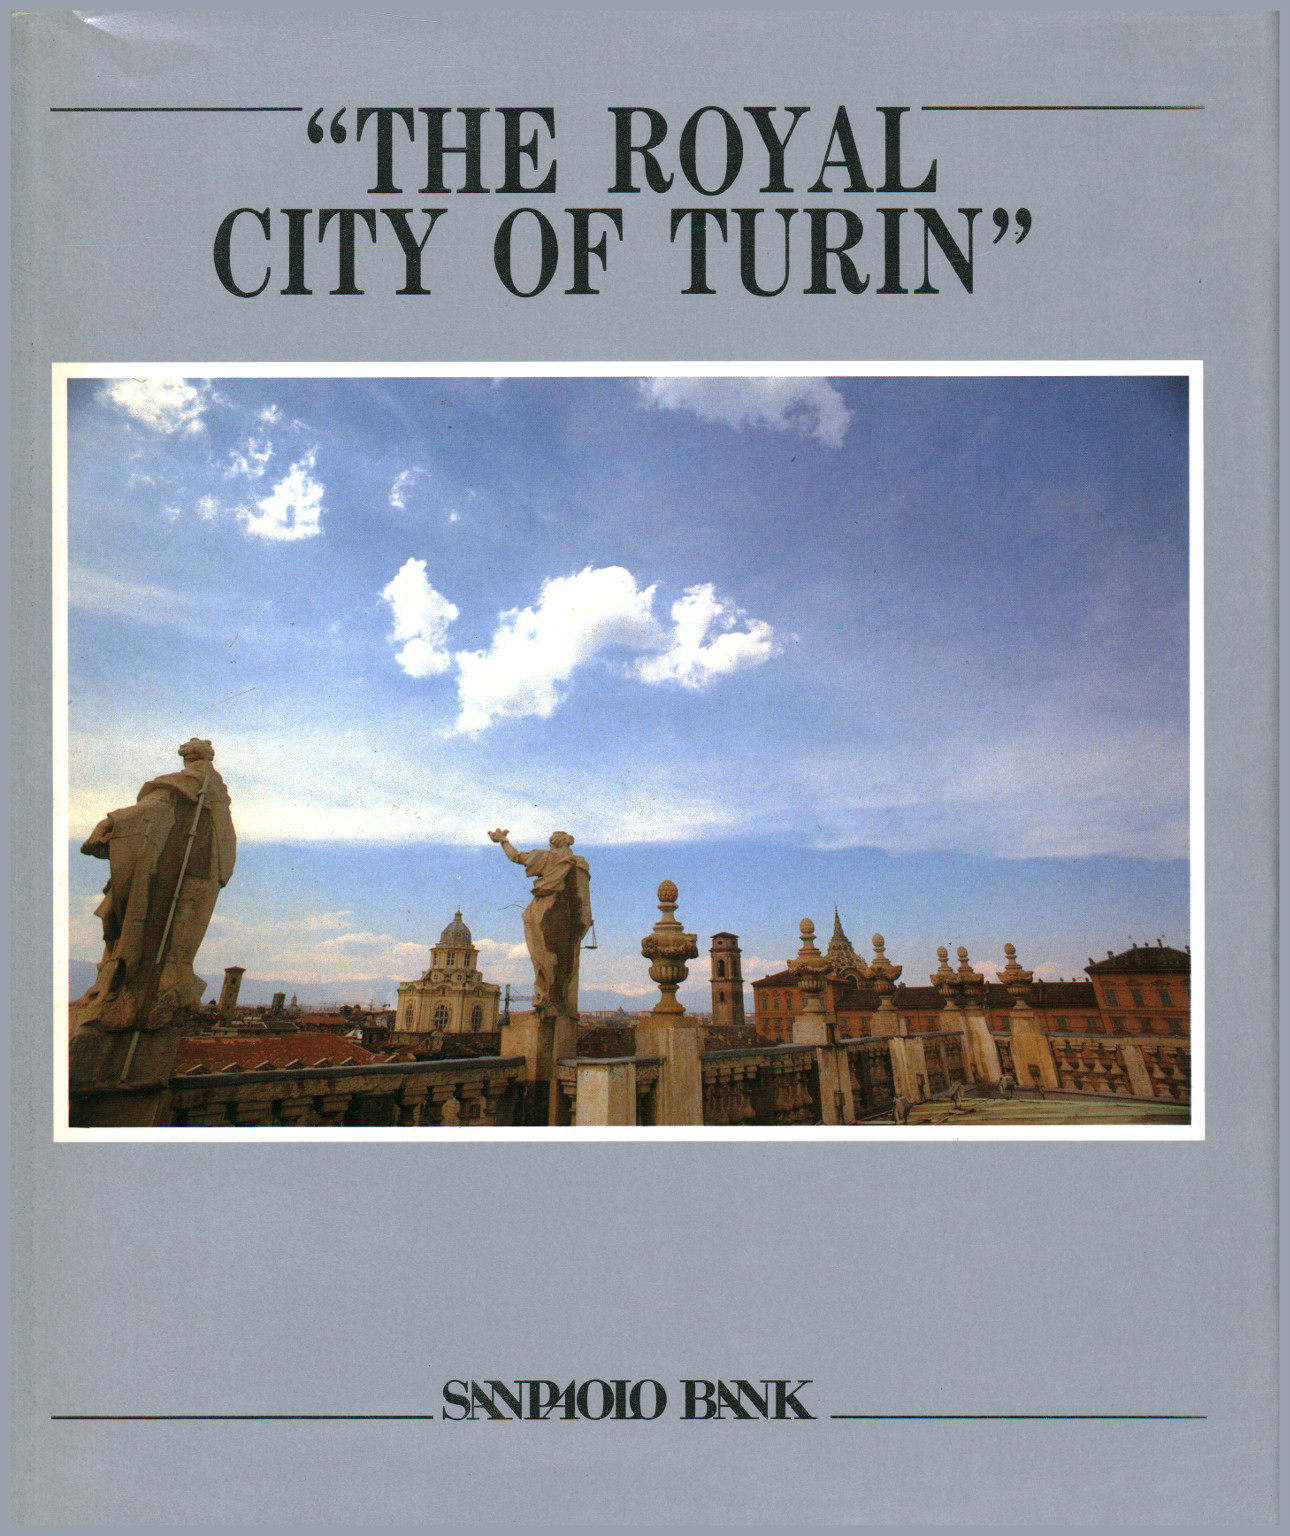 The Royal City of Turin, s.a.